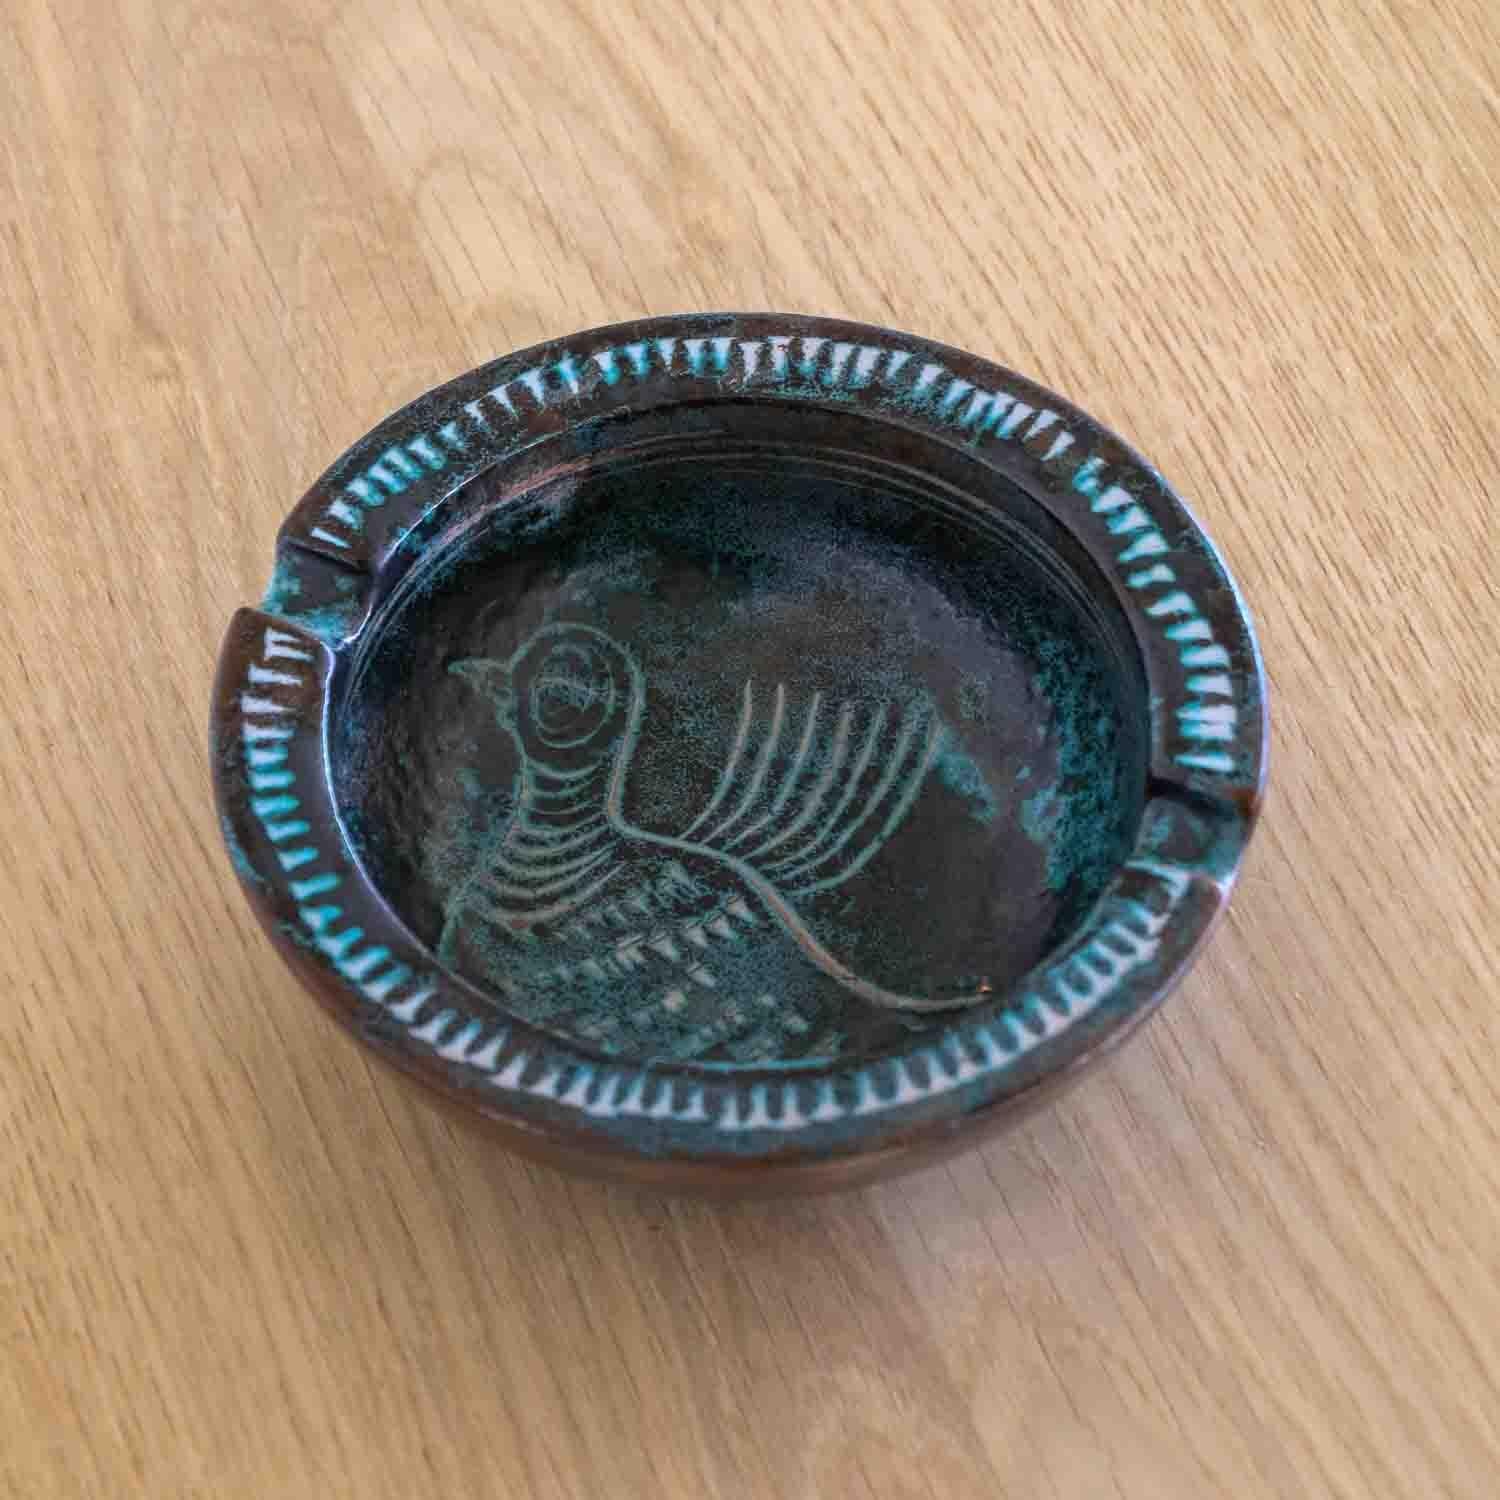 Wonderful painted ceramic ashtray from France, 1950's. Circular dish with small notches and green etched bird design on interior of bowl. Shades of dark brown and green glaze. Perfect as a catch-all or decorative piece. Signed underside.